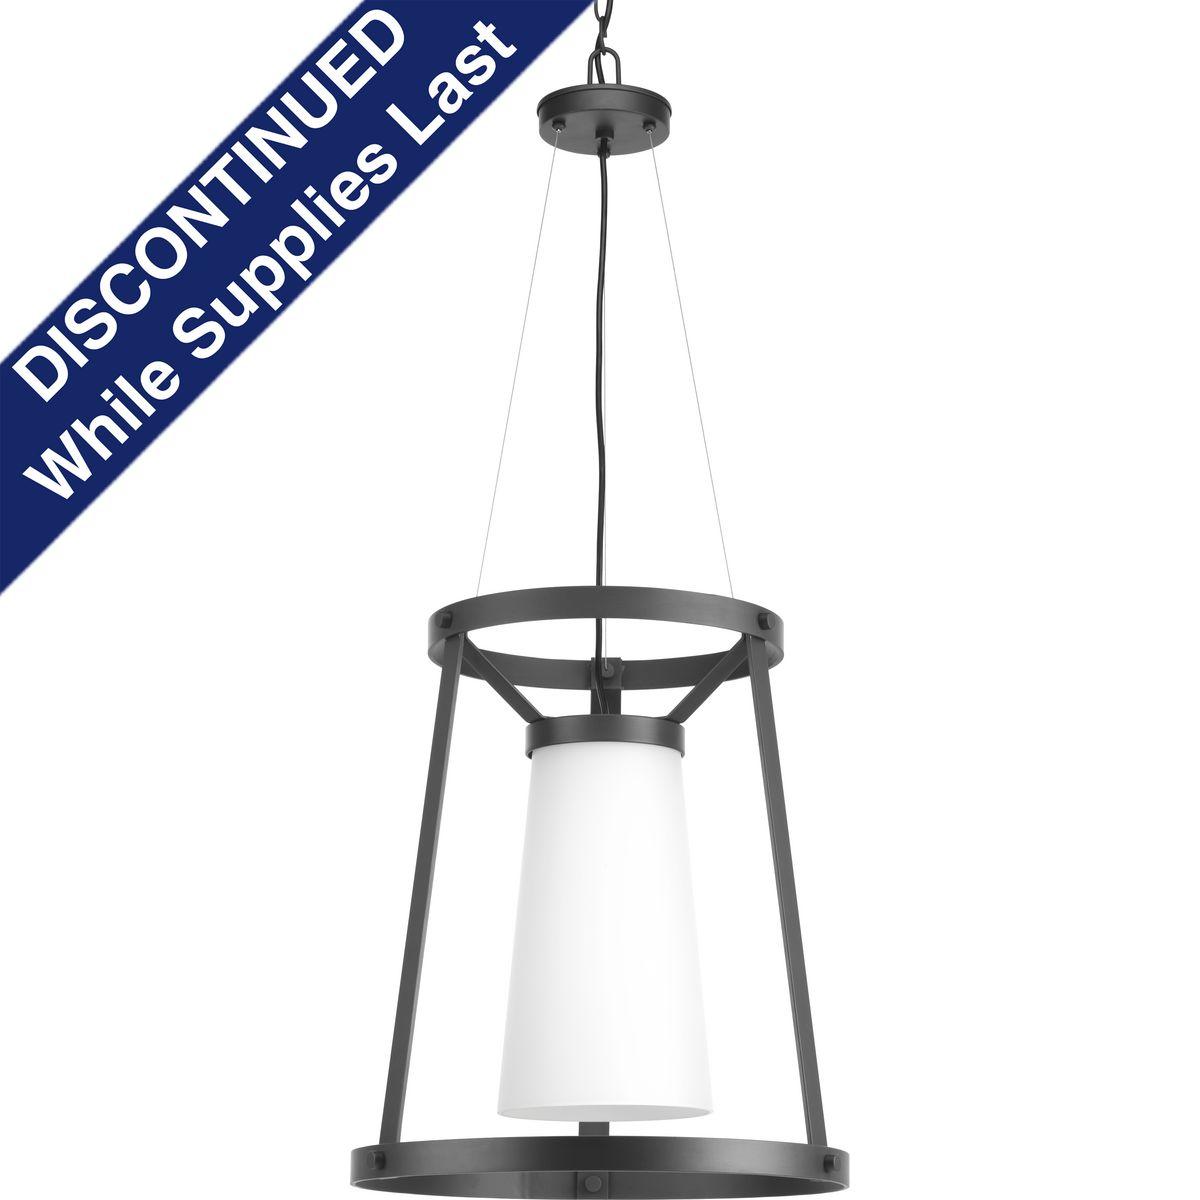 Hubbell P500026-143 Mobi strikes a dramatic note for modern spaces with this large pendant. Suspended by steel cables, the etched white glass shade is encased in an open frame finished in Graphite.  ; Graphite finish. ; Dramatic, modern styling. ; Suspended by steel cables. 